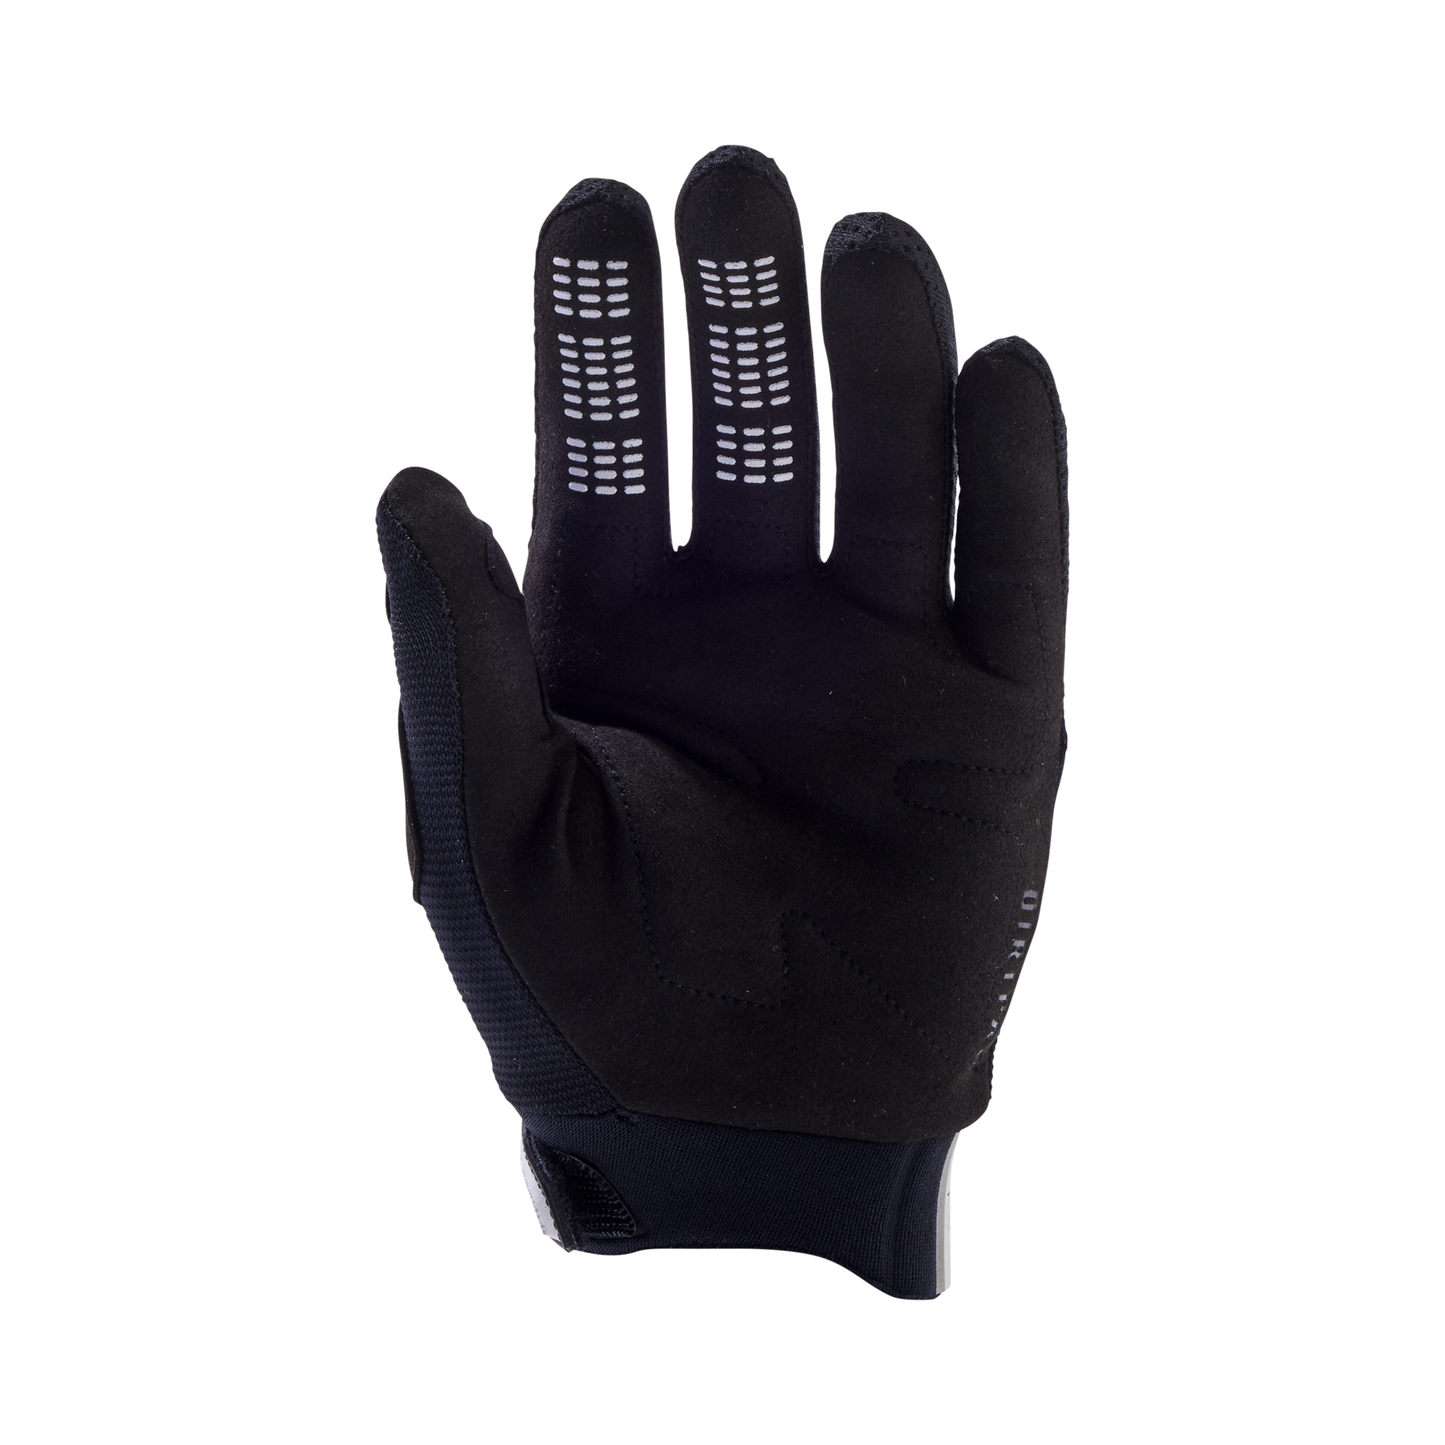 Fox Dirtpaw Youth Gloves - Youth L - Black - Image 2